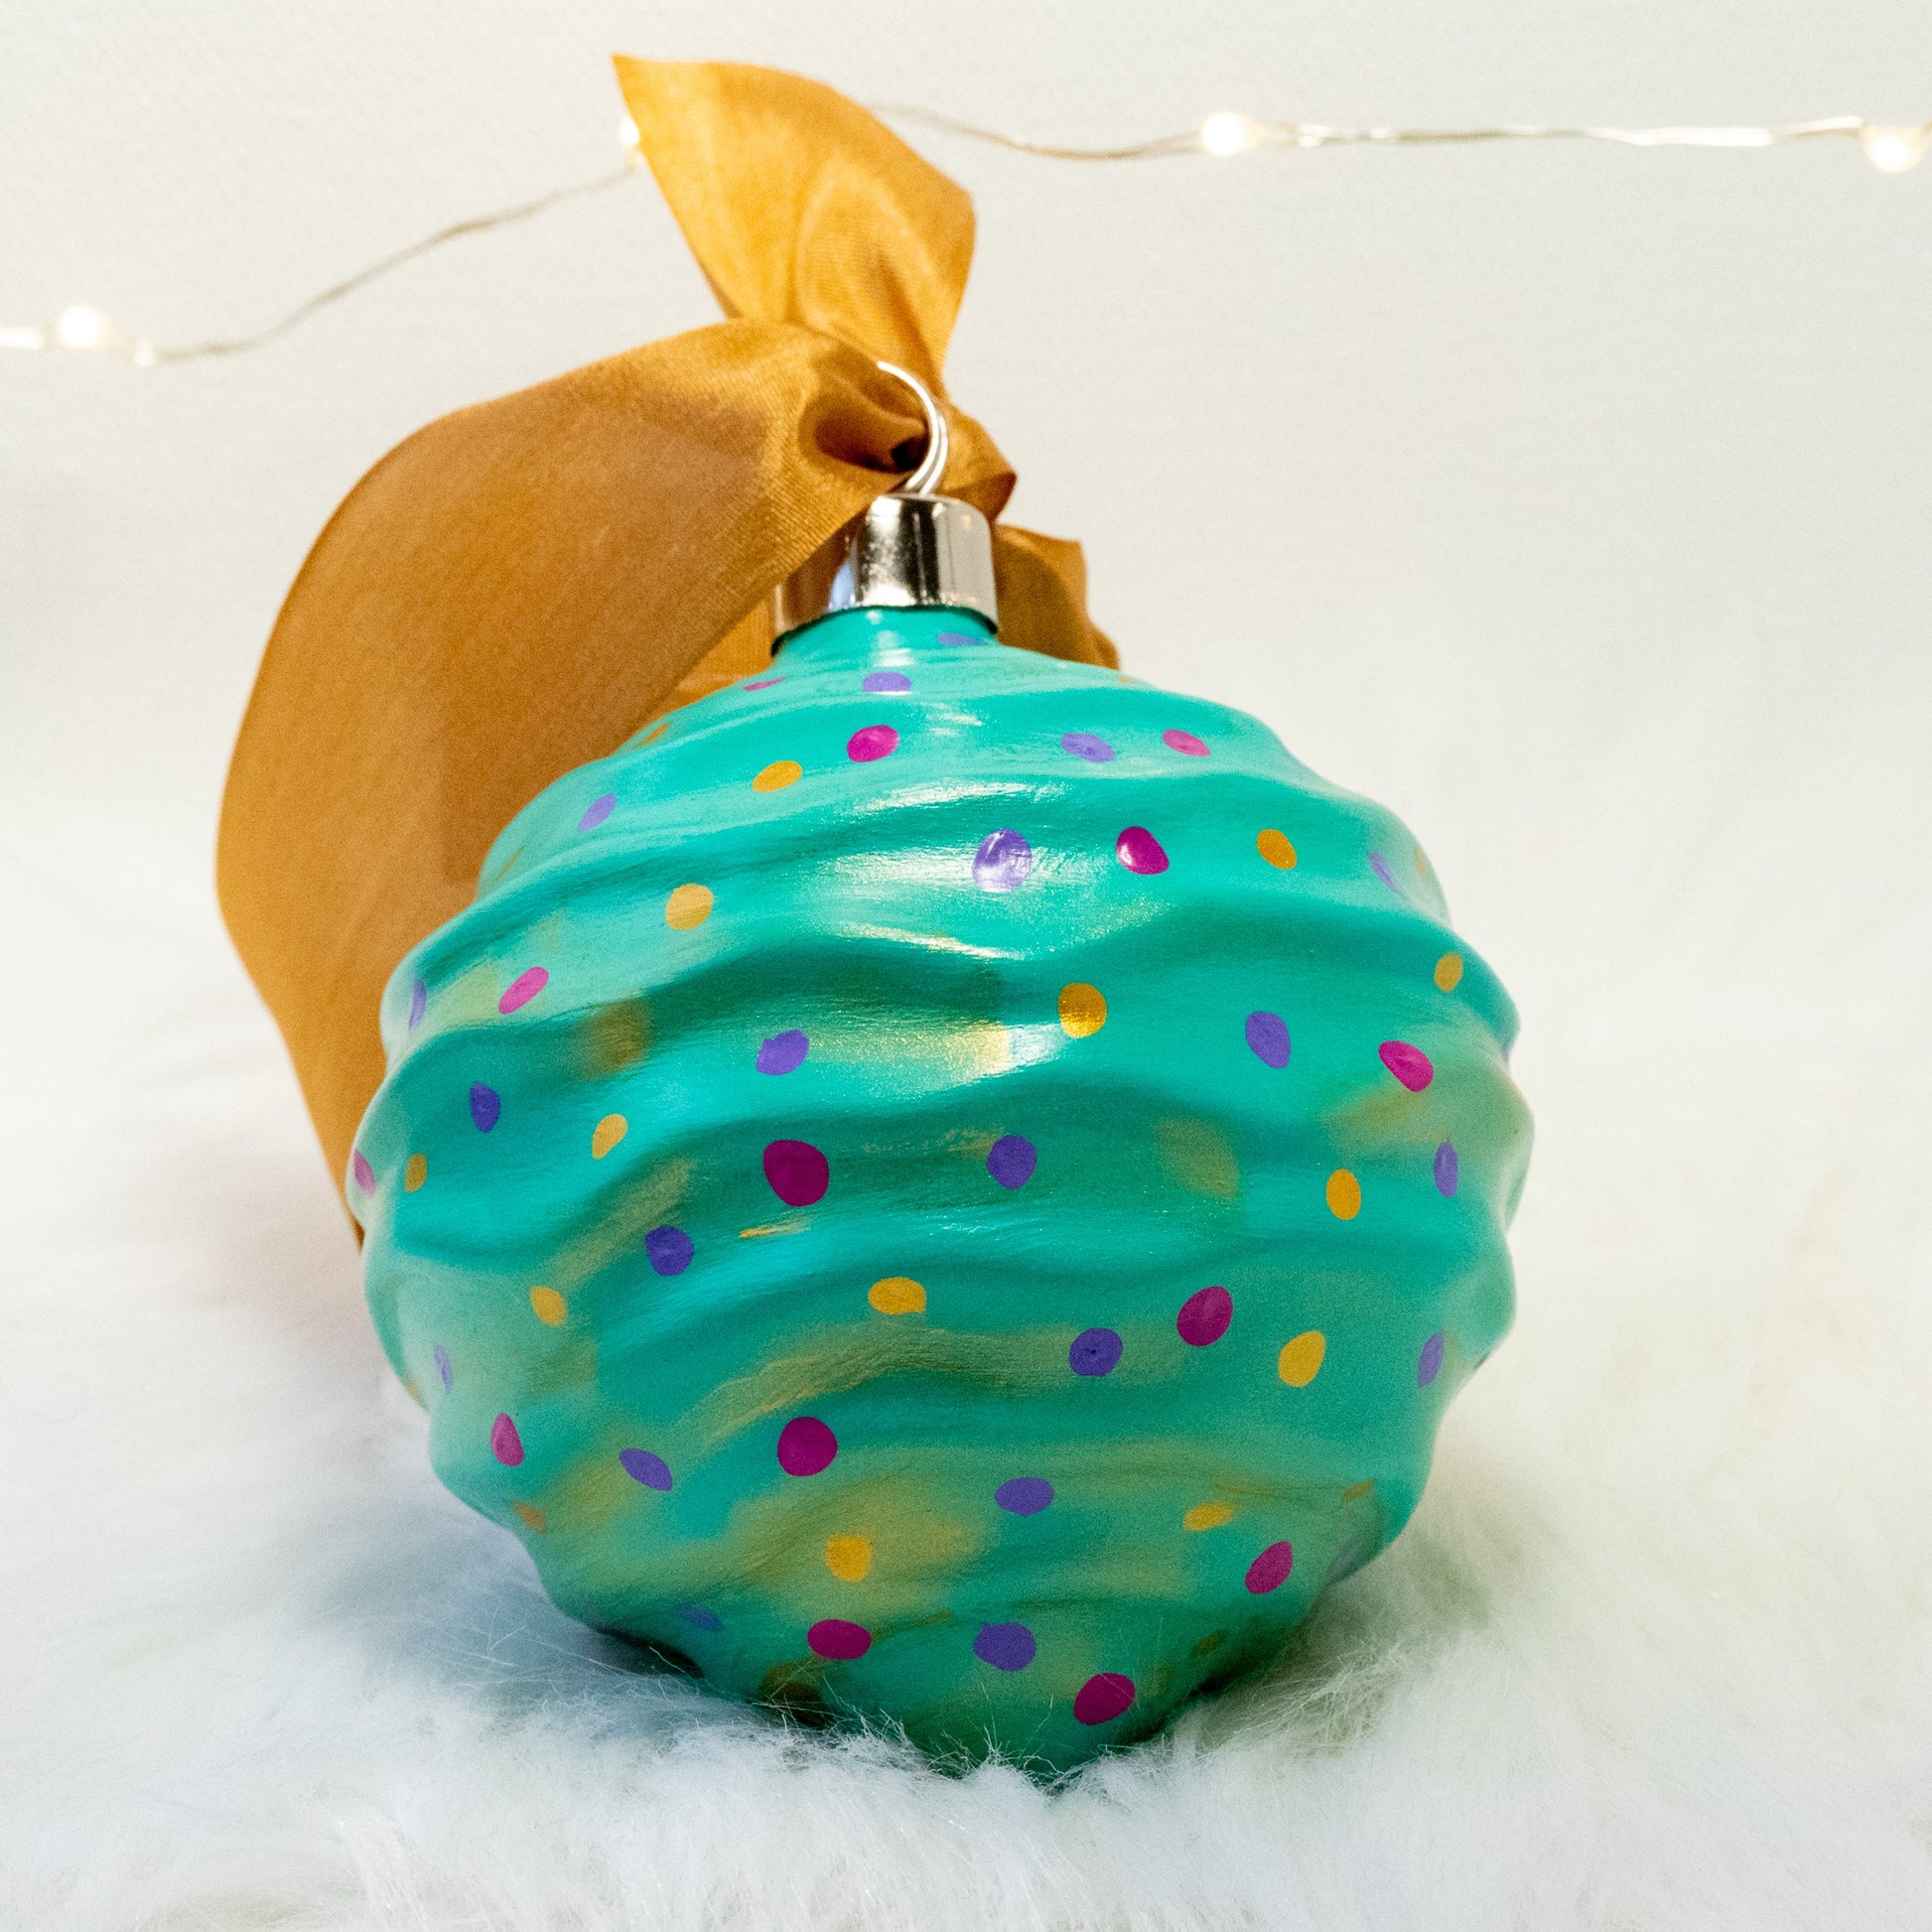 The Trina Hand Painted Ornament features a bright aqua green base coat with fuchsia, purple and gold polka dots and gold accents. Painted using fluid acrylic and acrylic paints. Displayed on white faux fur with fairy lights in the background.